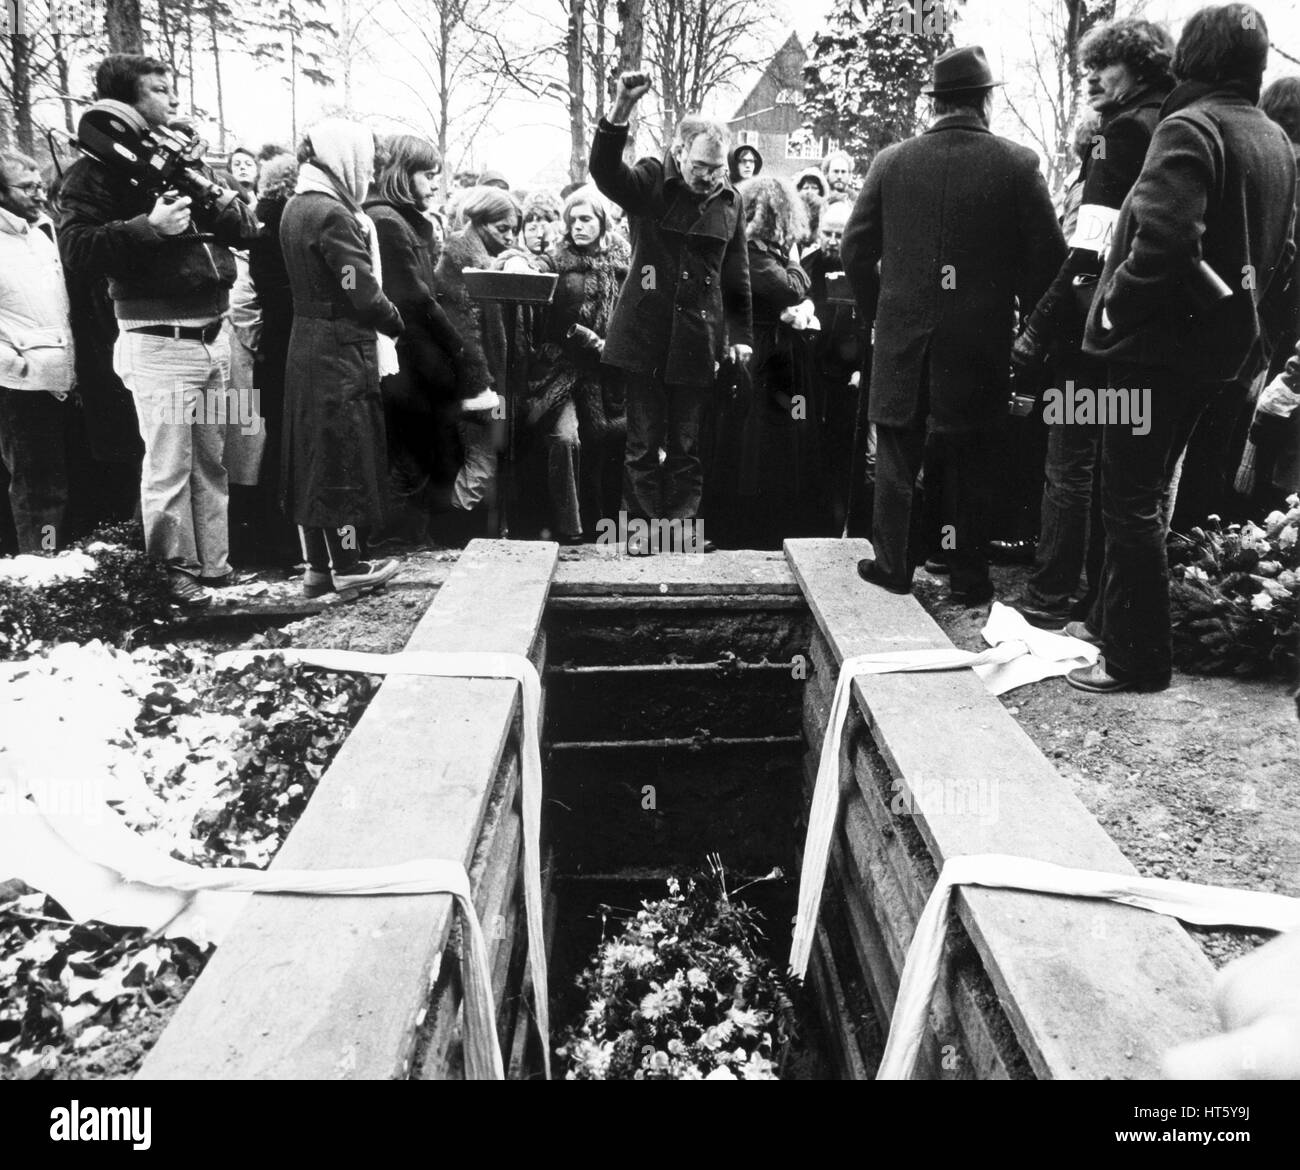 Berlin, January 3, 1980 - Burial of RUDI DUTSCHKE (* 7. März 1940; † 24. Dezember 1979) at the St.-Annen cemetery in Berlin-Dahlem. Rudi Dutschke was the most prominent spokesperson of the German student movement of the 1960s Stock Photo